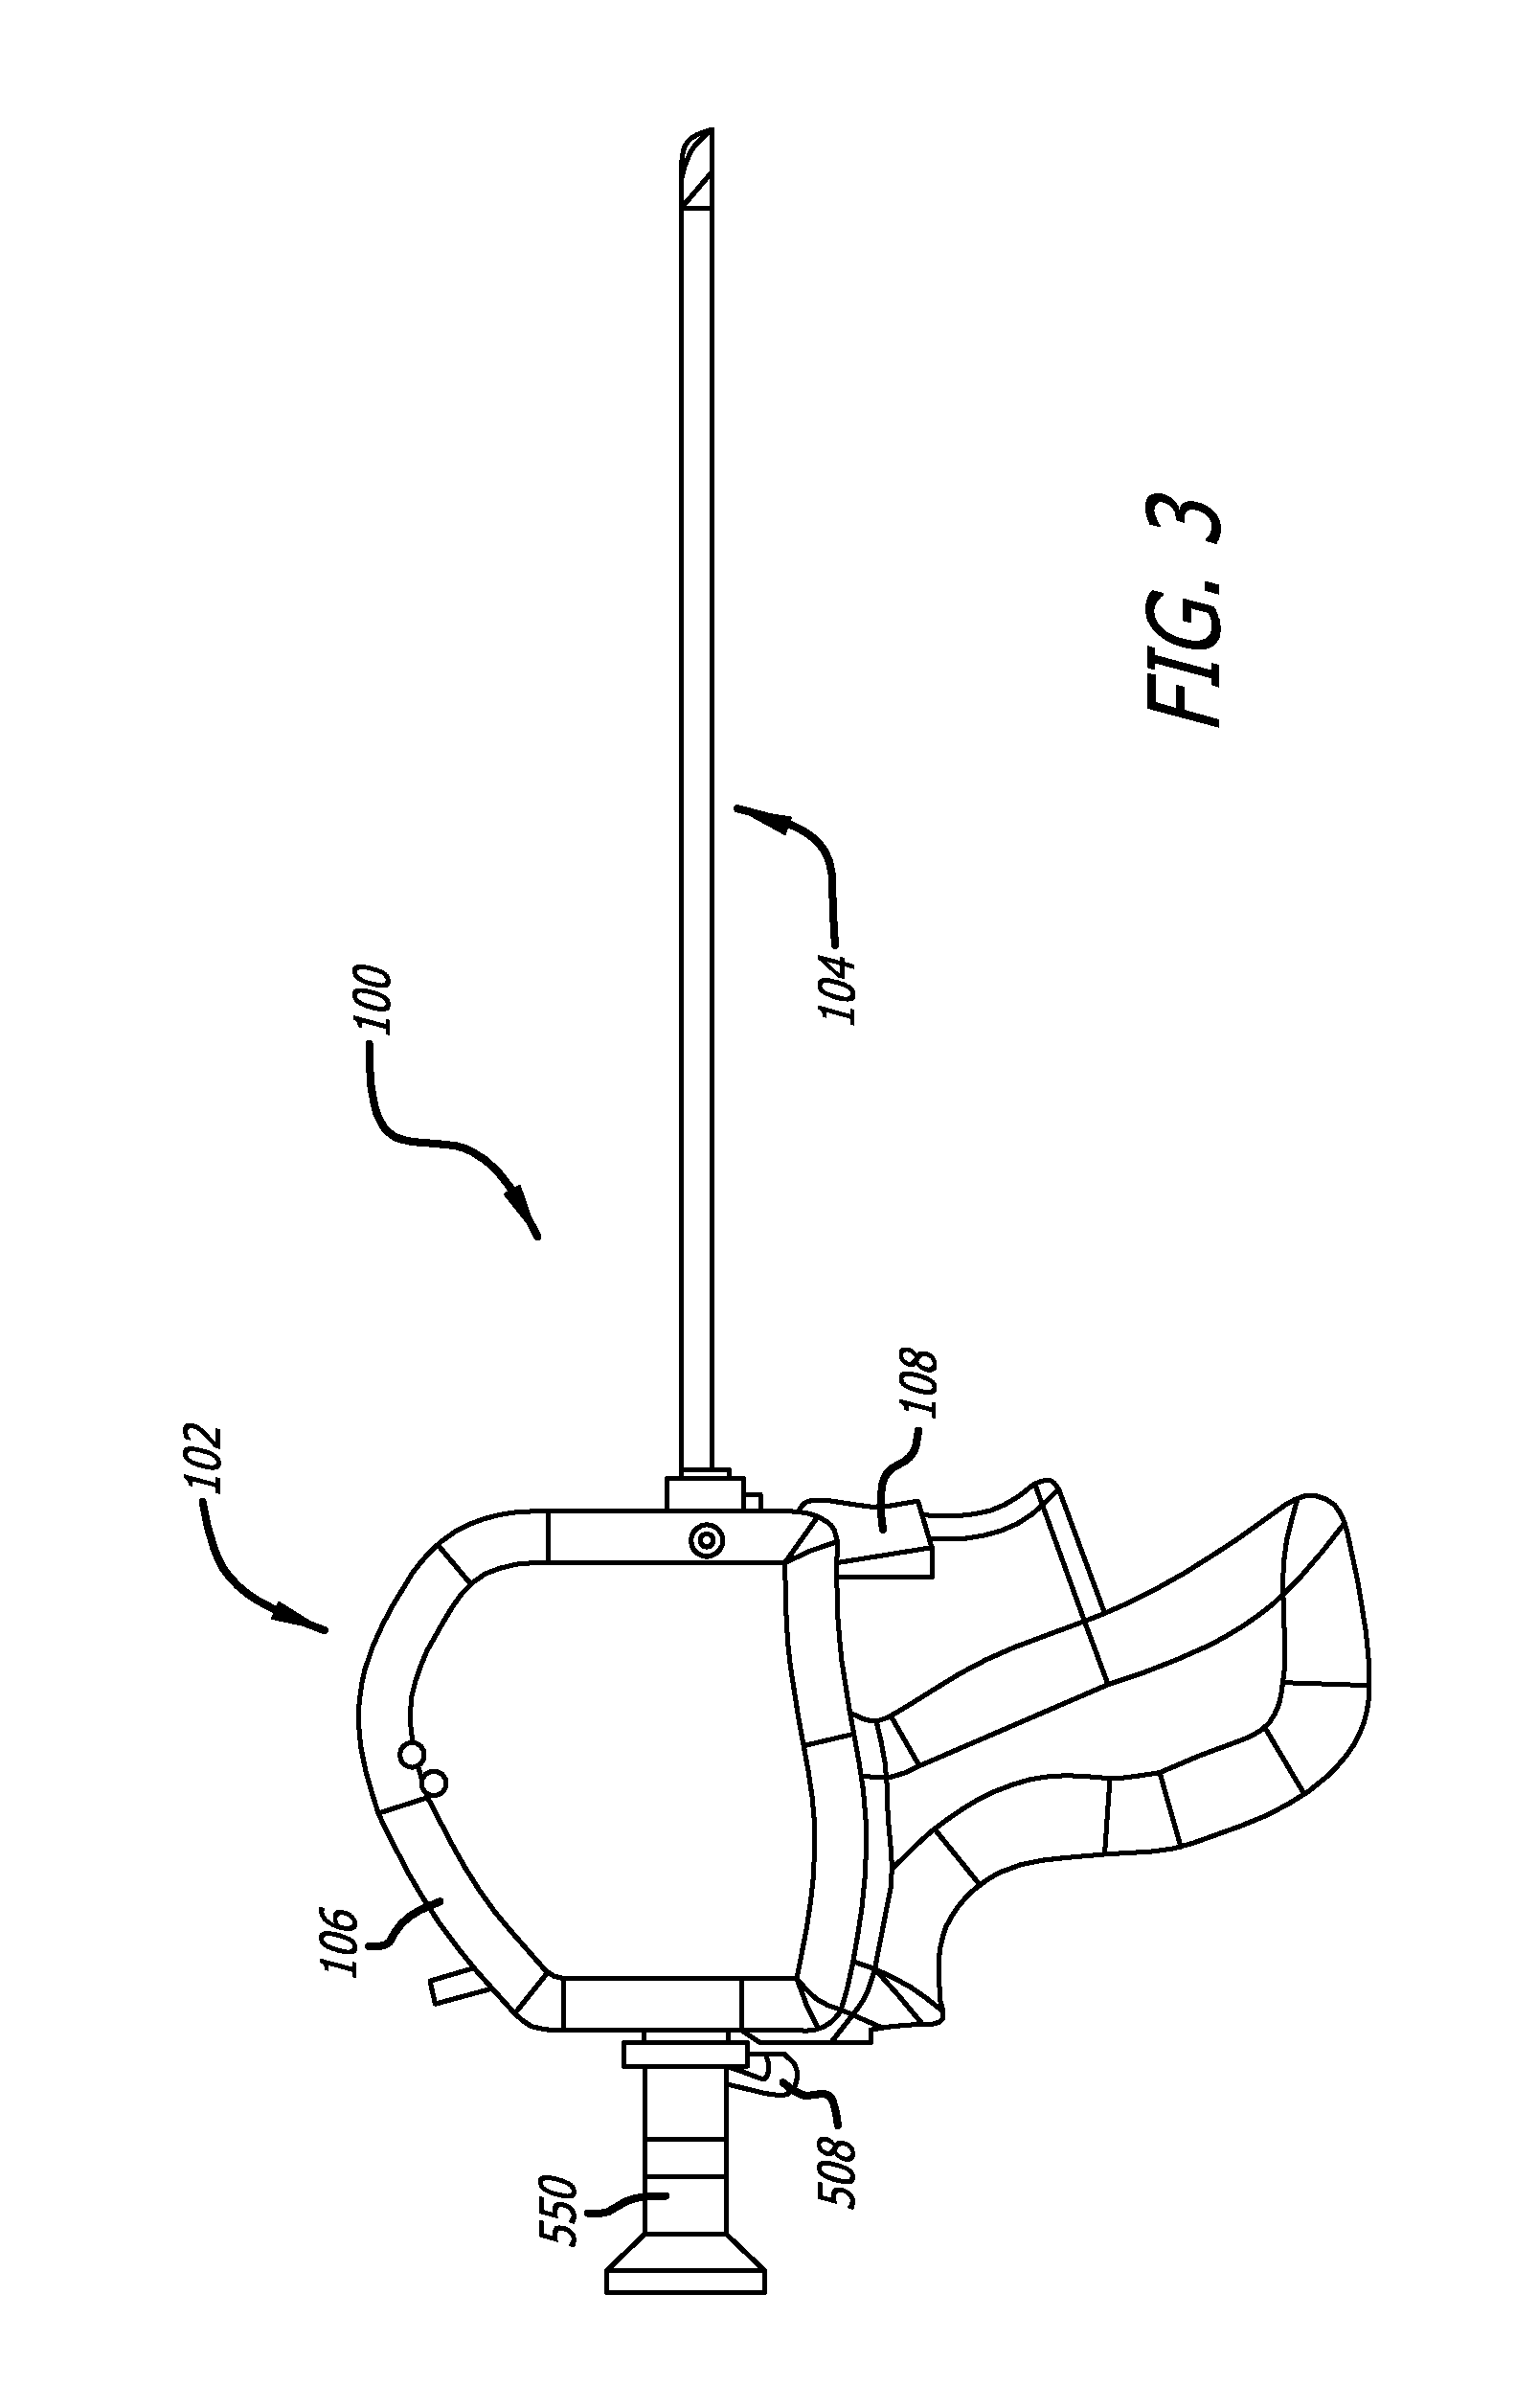 Anchor delivery system with replaceable cartridge